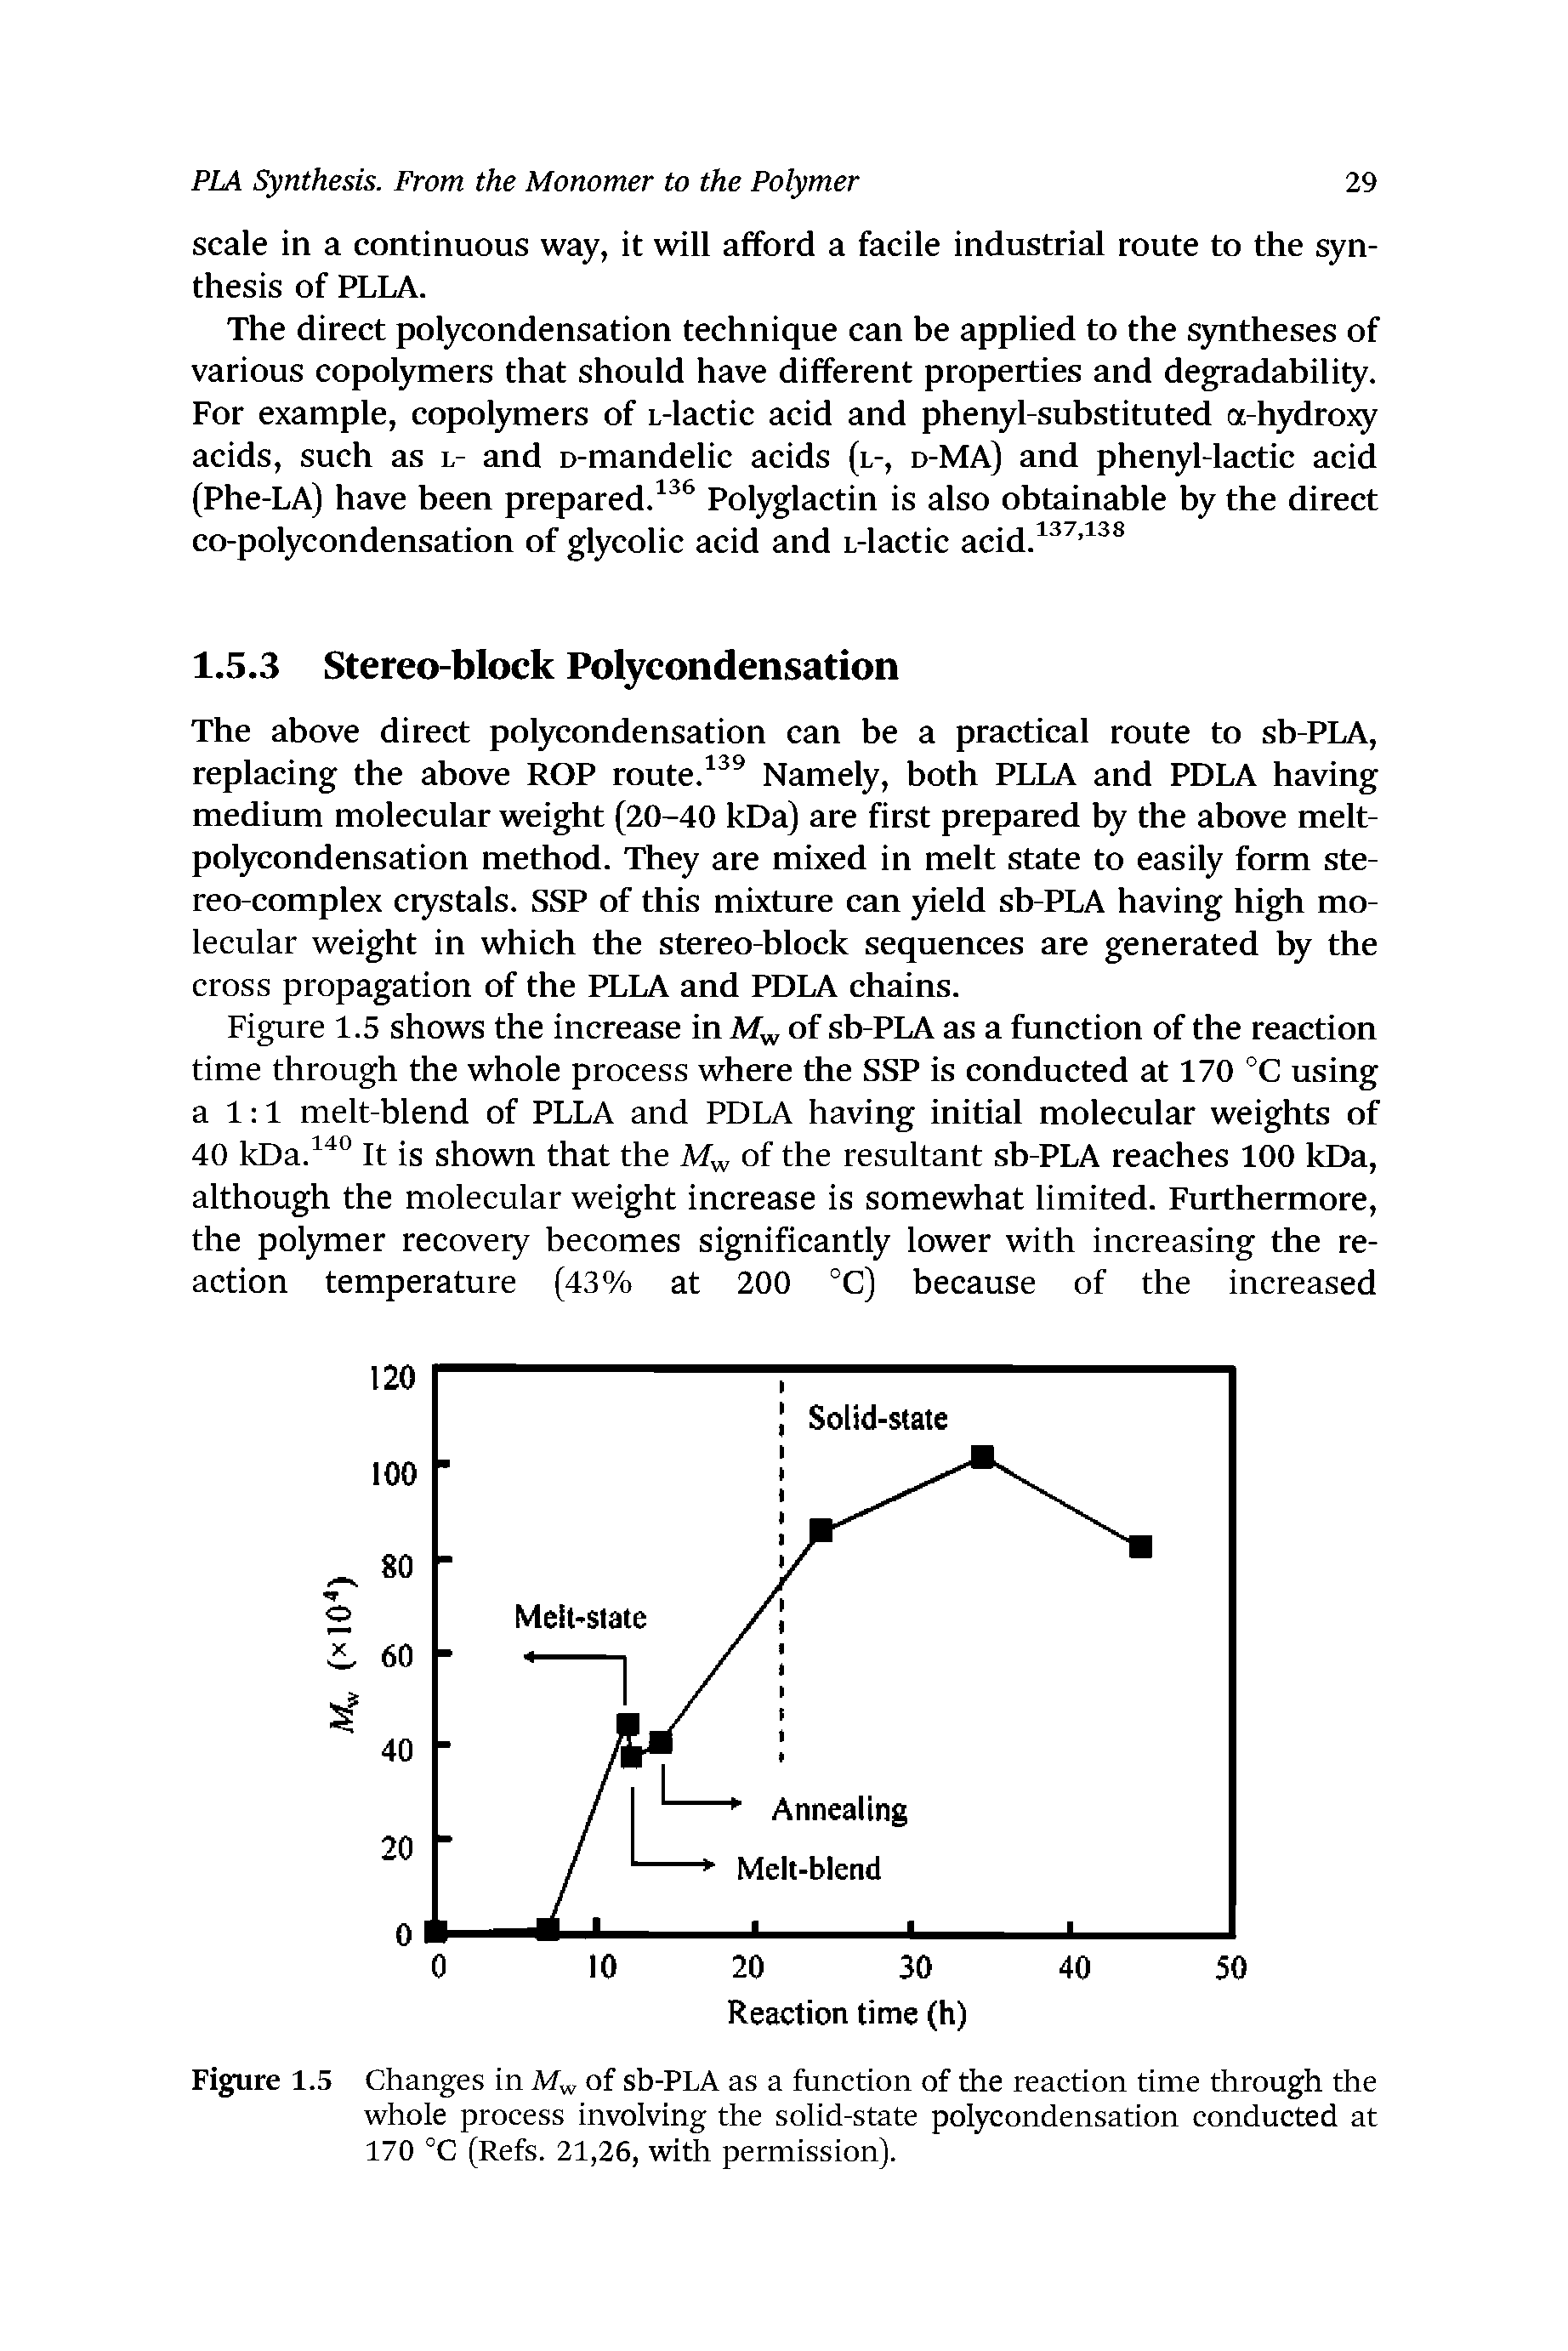 Figure 1.5 Changes in M of sb-PLA as a function of the reaction time through the whole process involving the solid-state polycondensation conducted at 170 °C (Refs. 21,26, with permission).